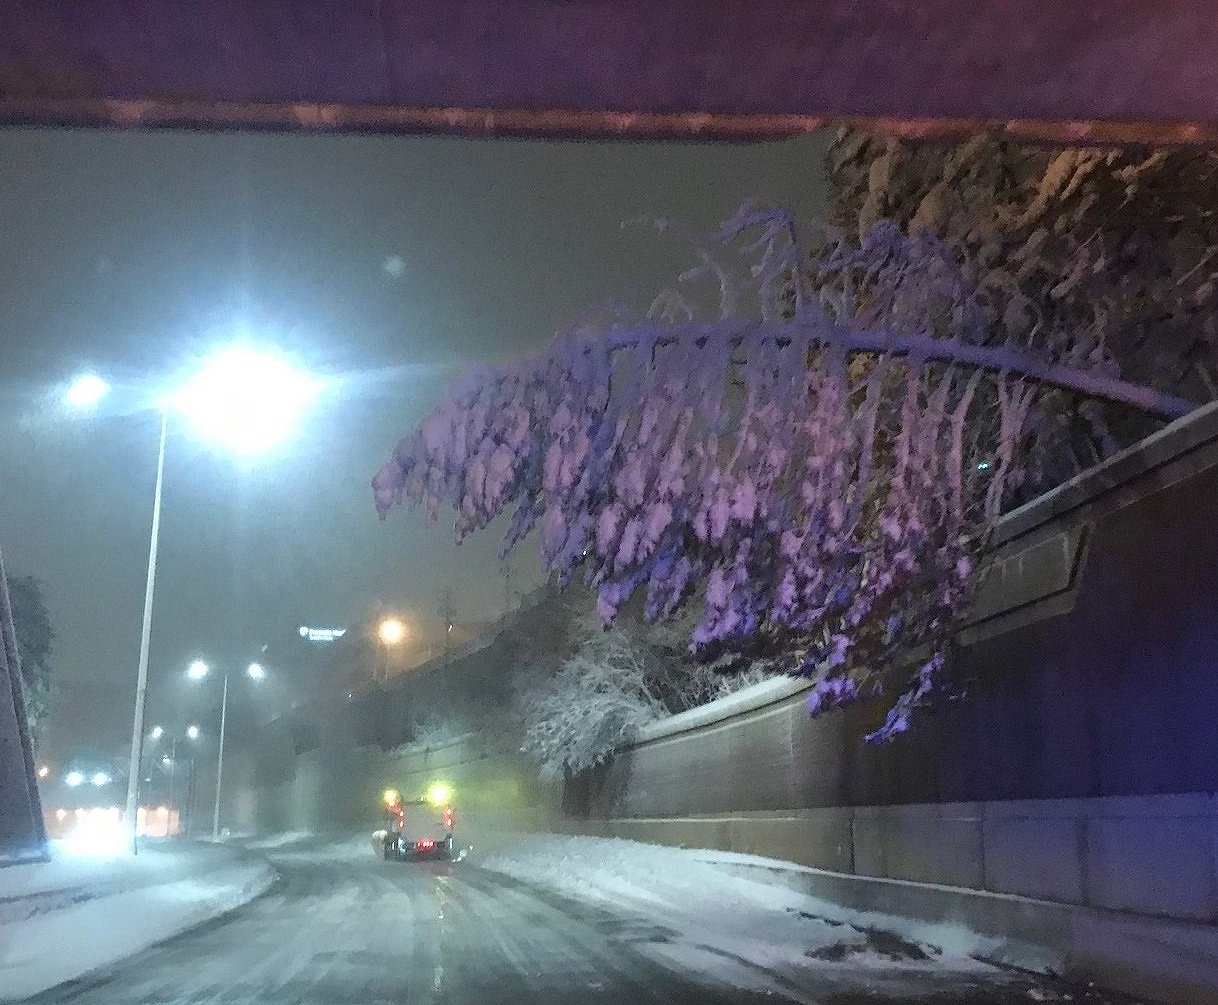 This photo shows a large pine tree, covered in snow, as it leans nearly sideways over a roadway, weight down by ice and snow